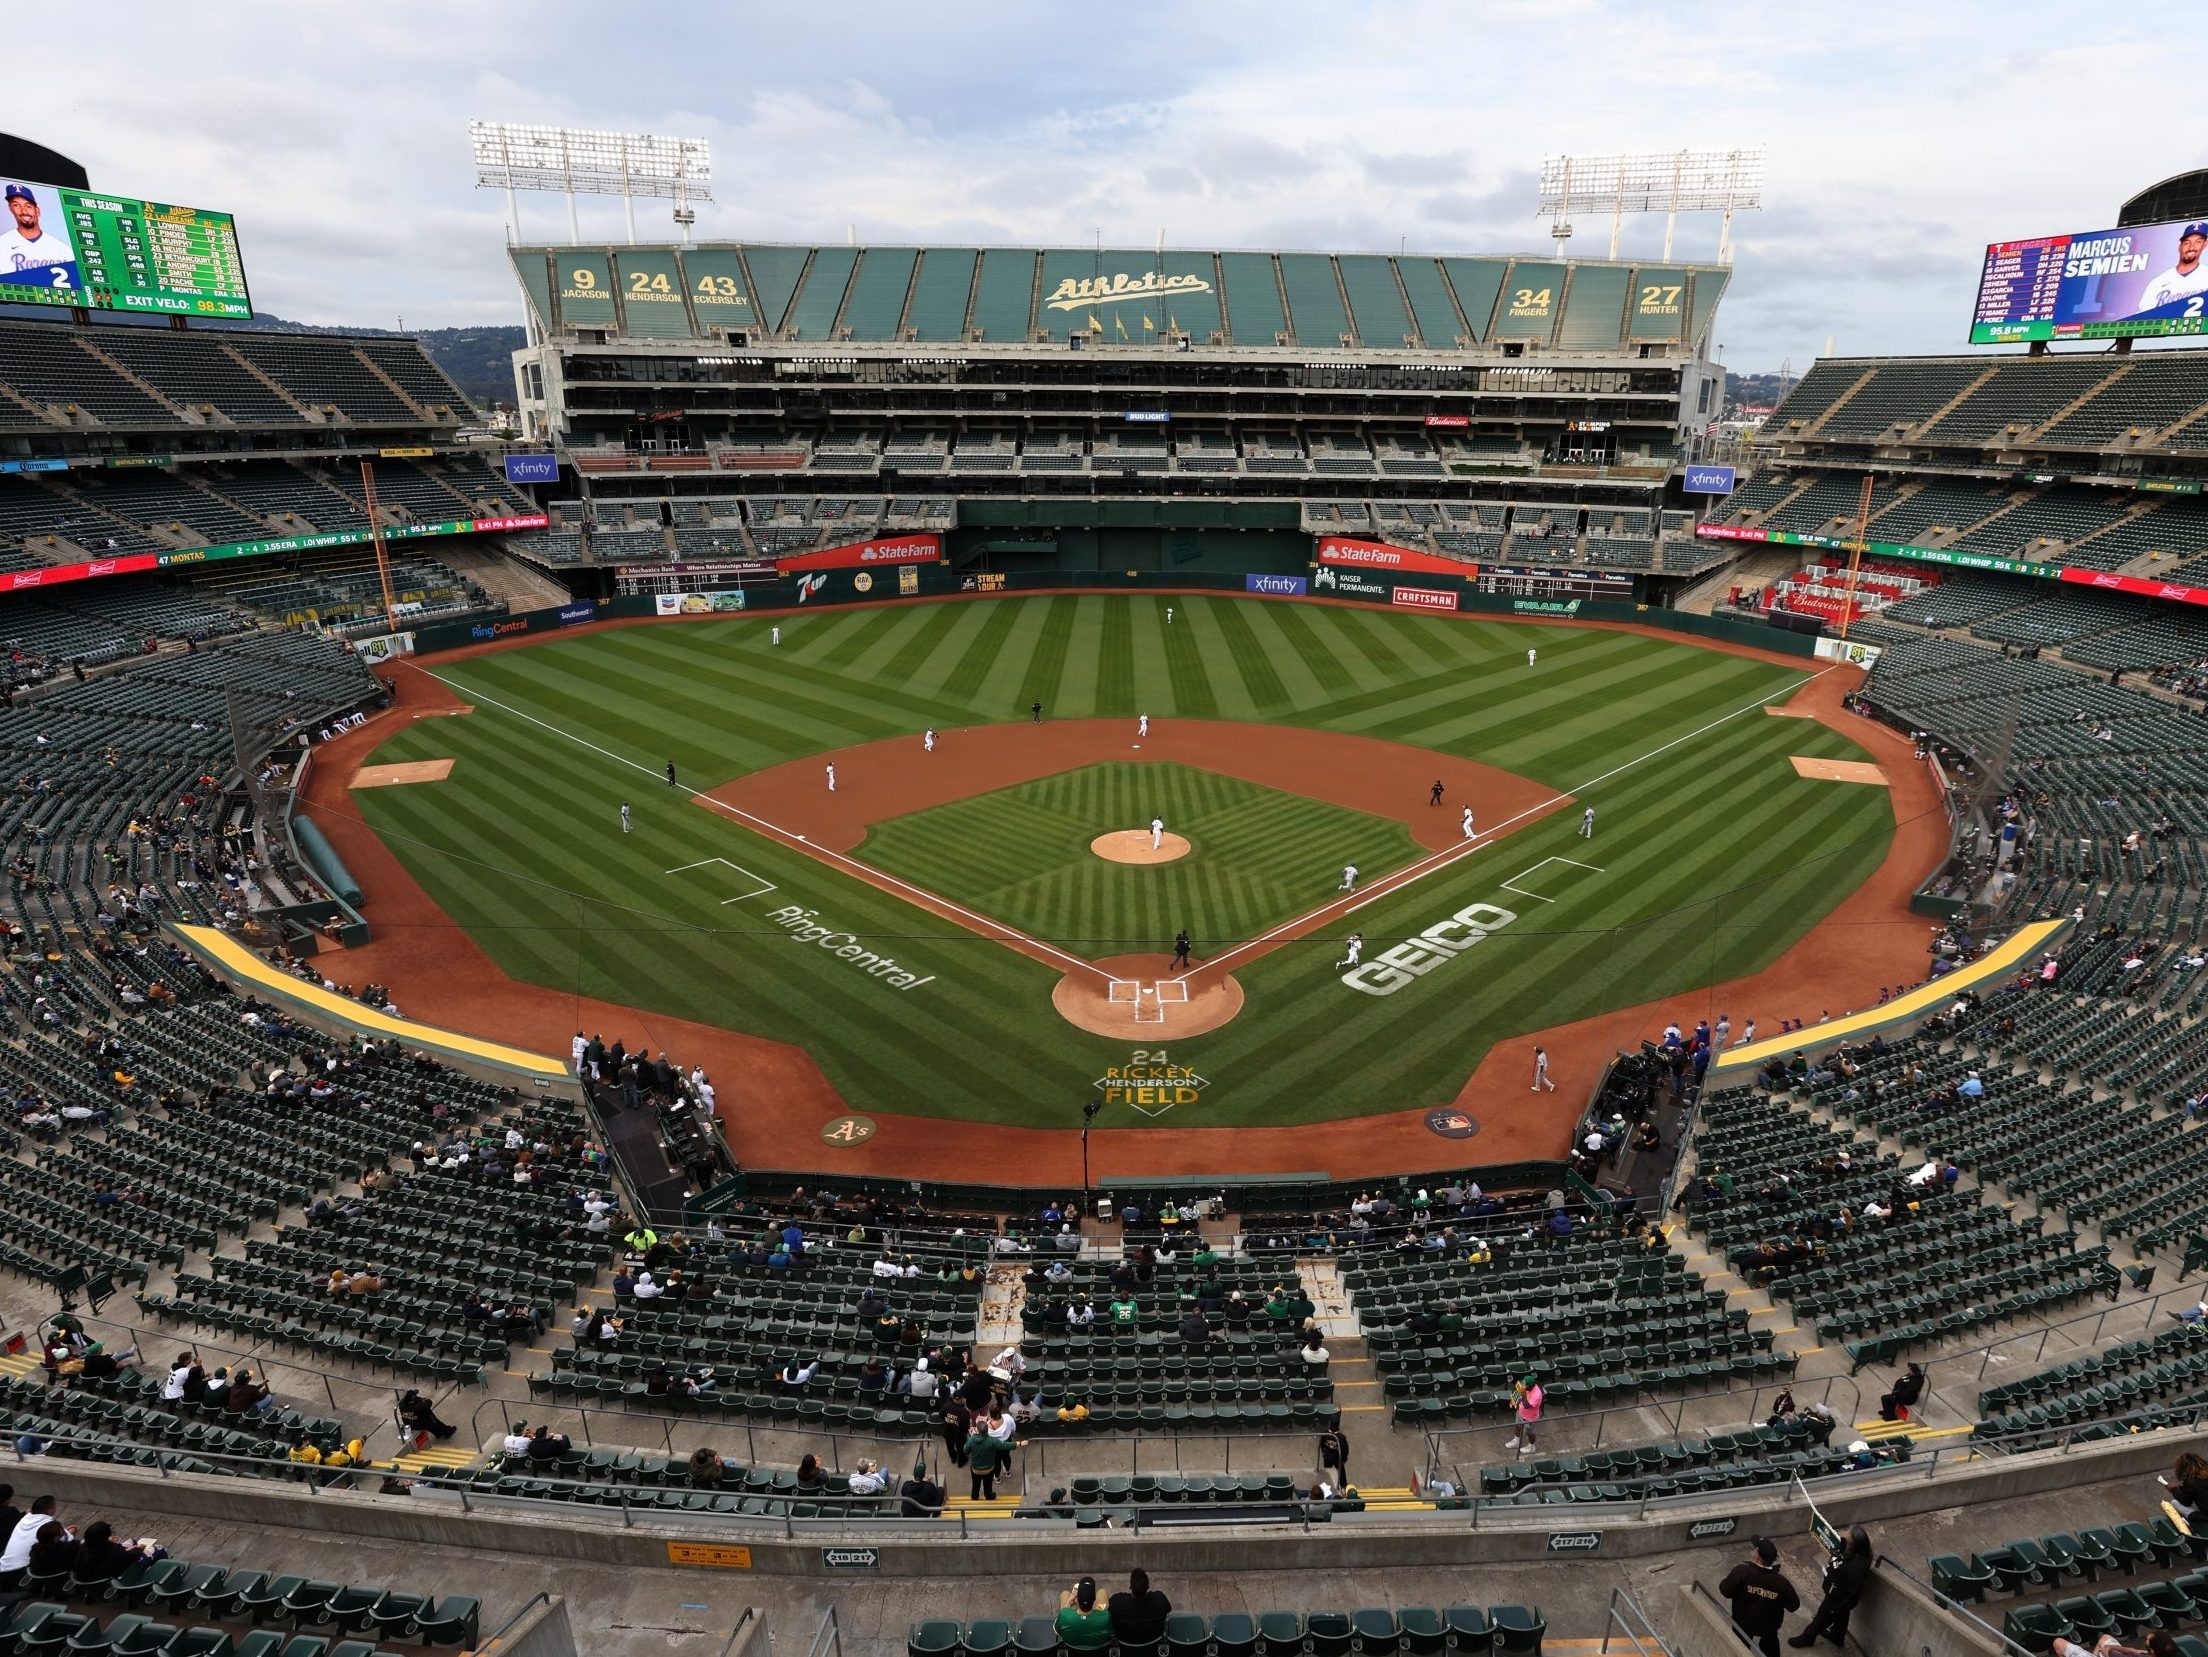 Will the Las Vegas MLB team be called the A's?